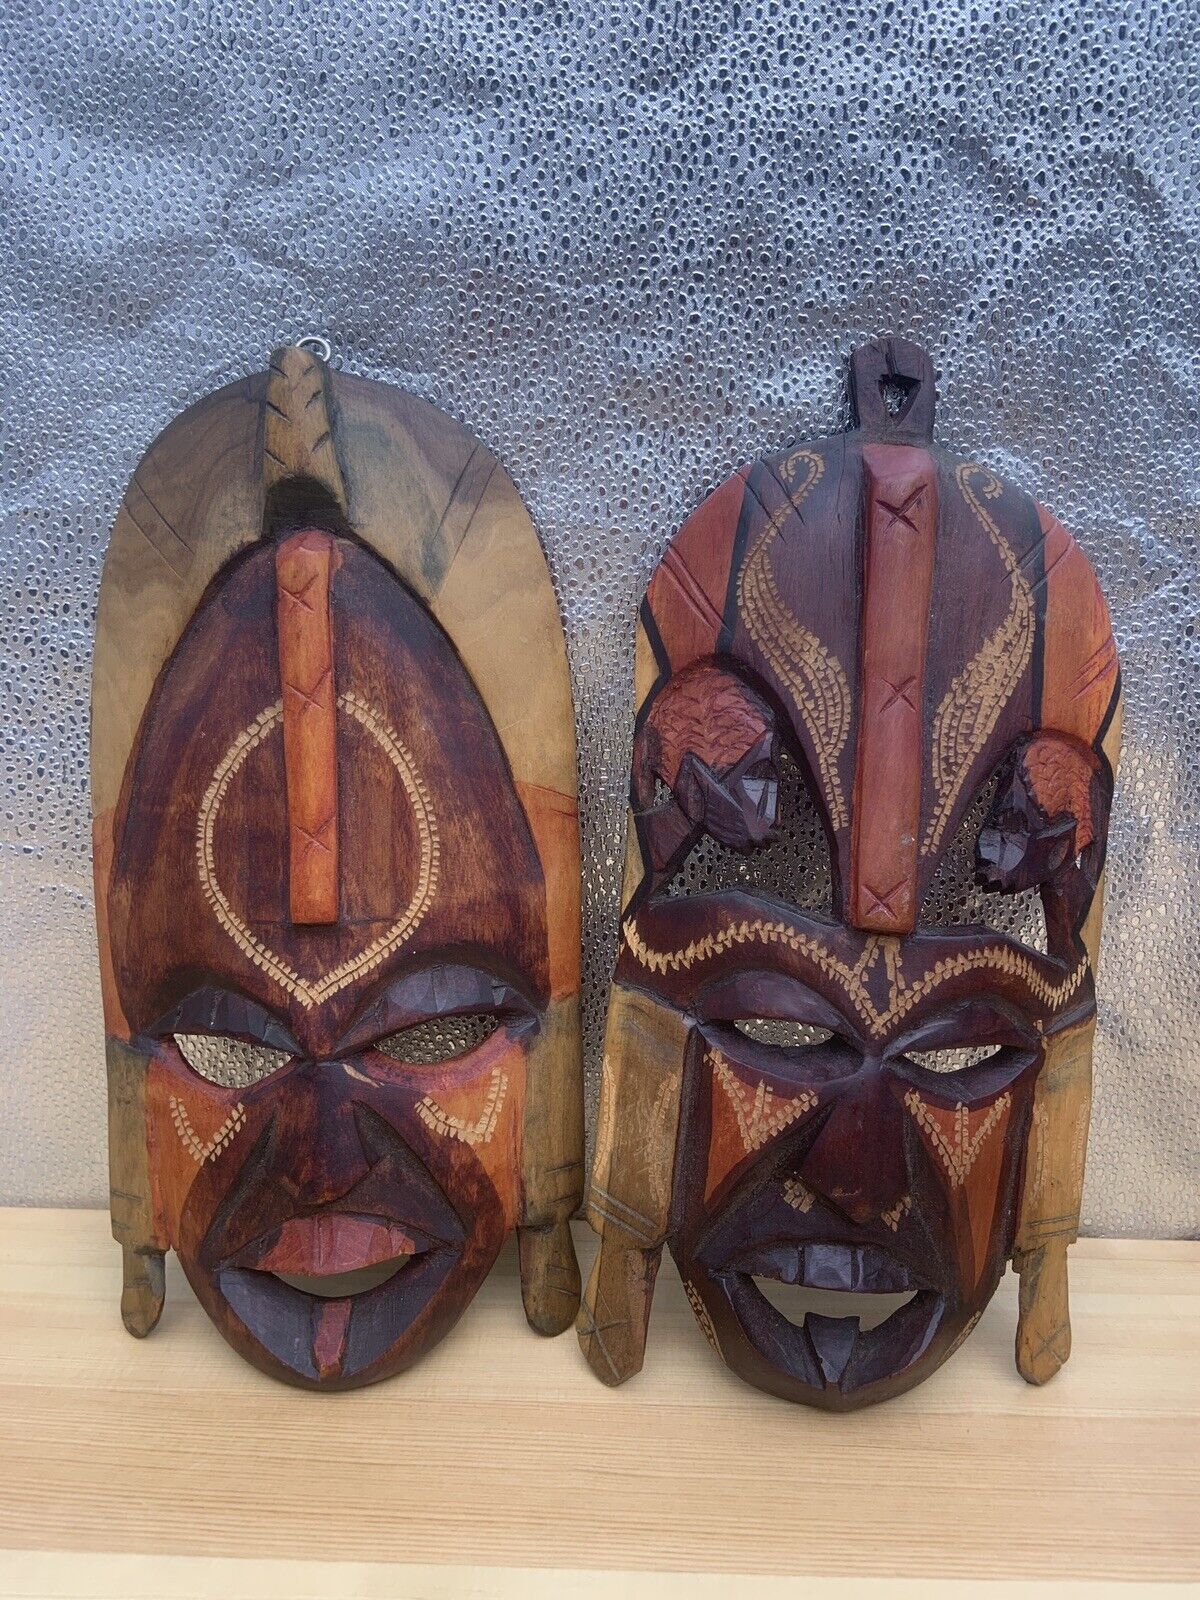 2 Vintage African Masks Muhuhu Wood Made In Kenya. Handcrafted Beautiful Color